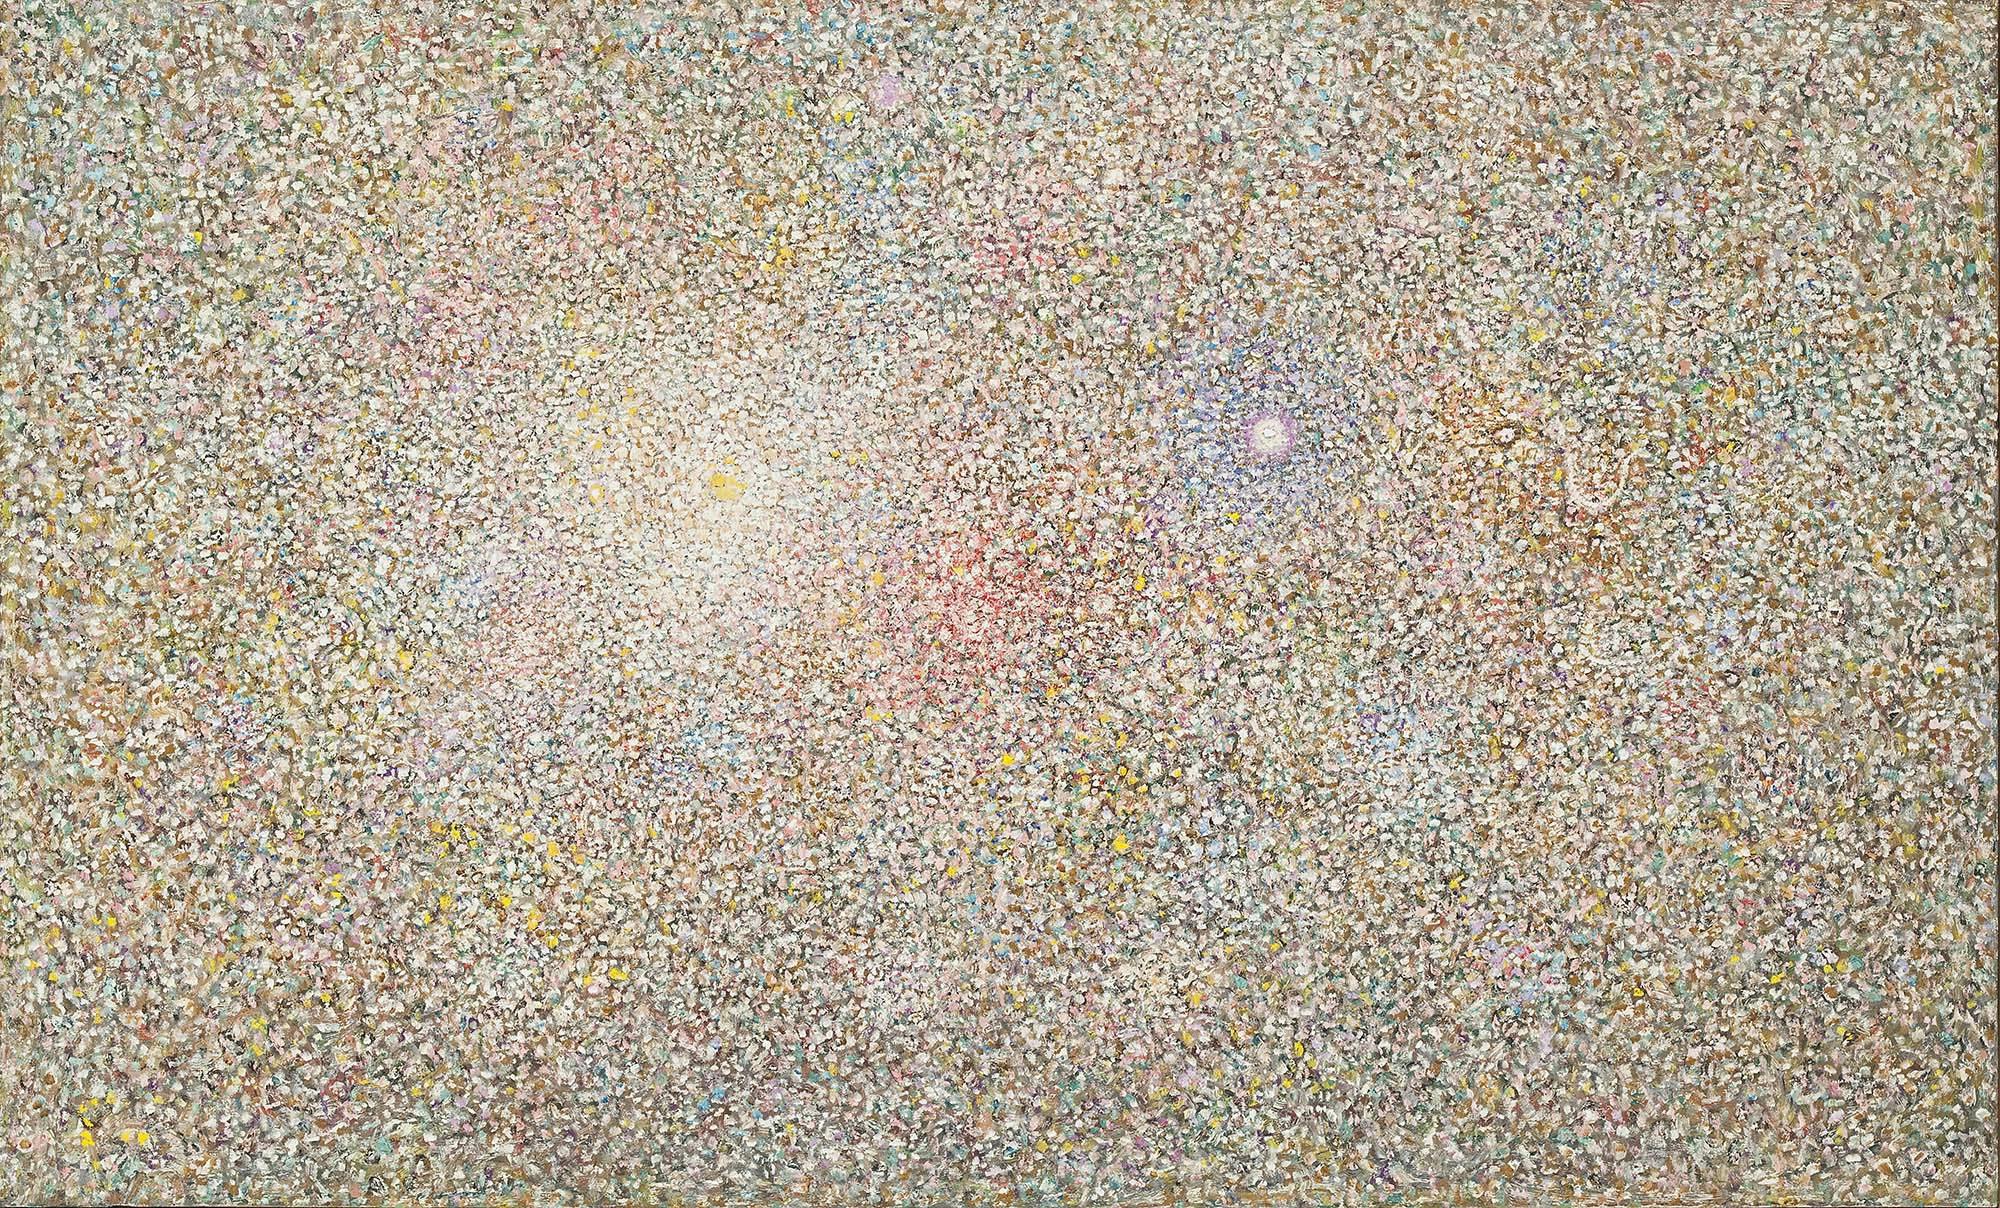 Sky Presence, Morning
1963
Oil on canvas
43 1/8 x 71 in. (109.5 x 180.3 cm) 
Whitney Museum of American Art, New York, Purchase, with funds from the Friends of the Whitney Museum of American Art (63.53)
 – The Richard Pousette-Dart Foundation